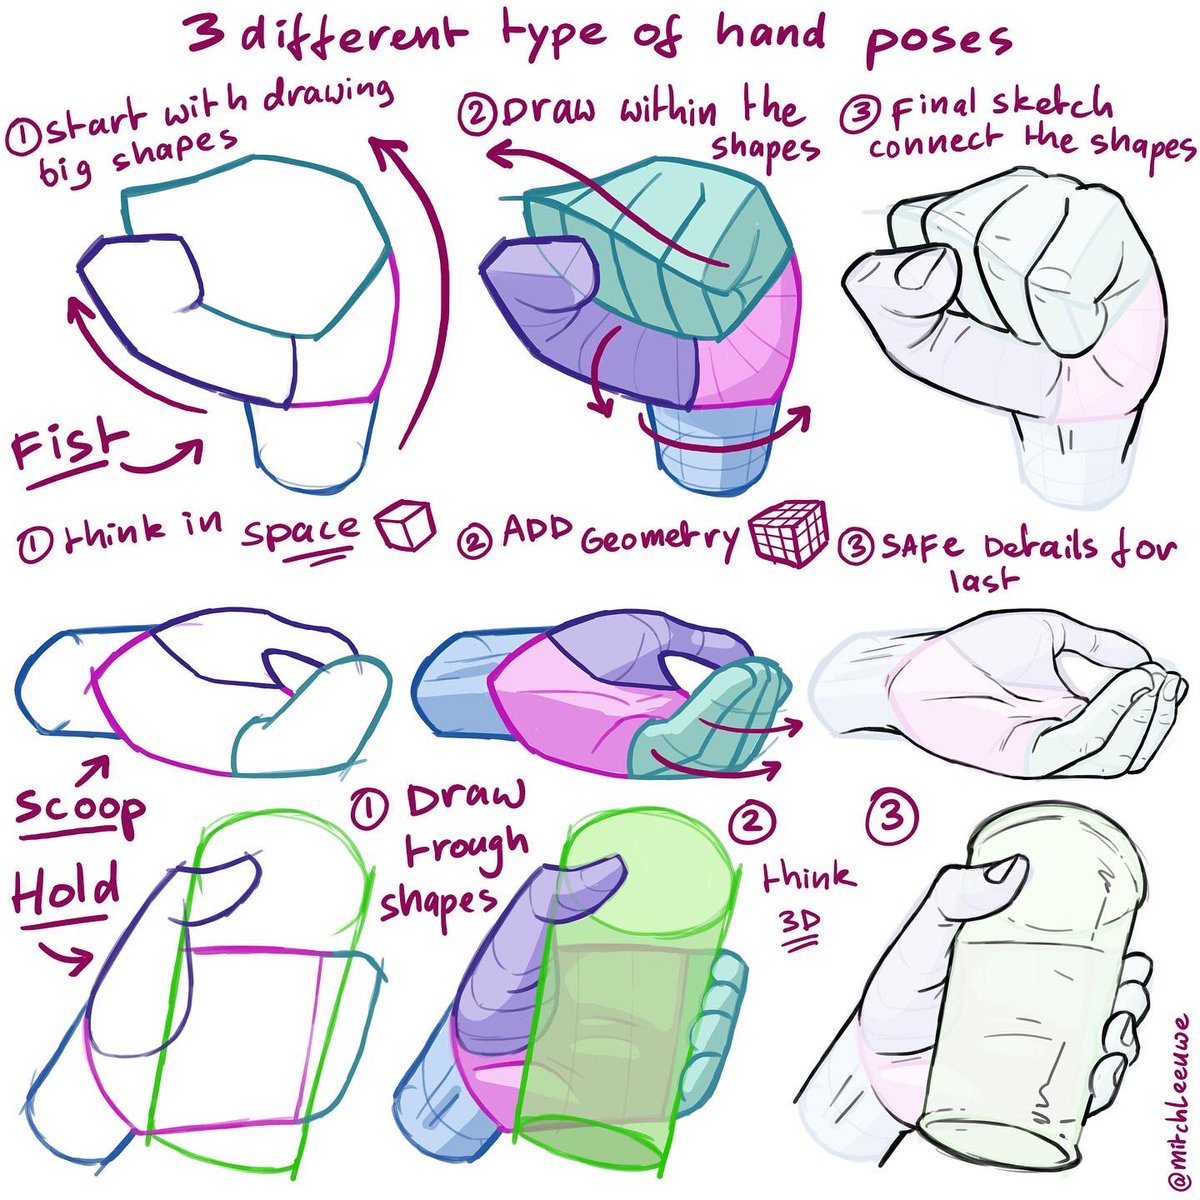 Some anatomy tips for drawing hands!